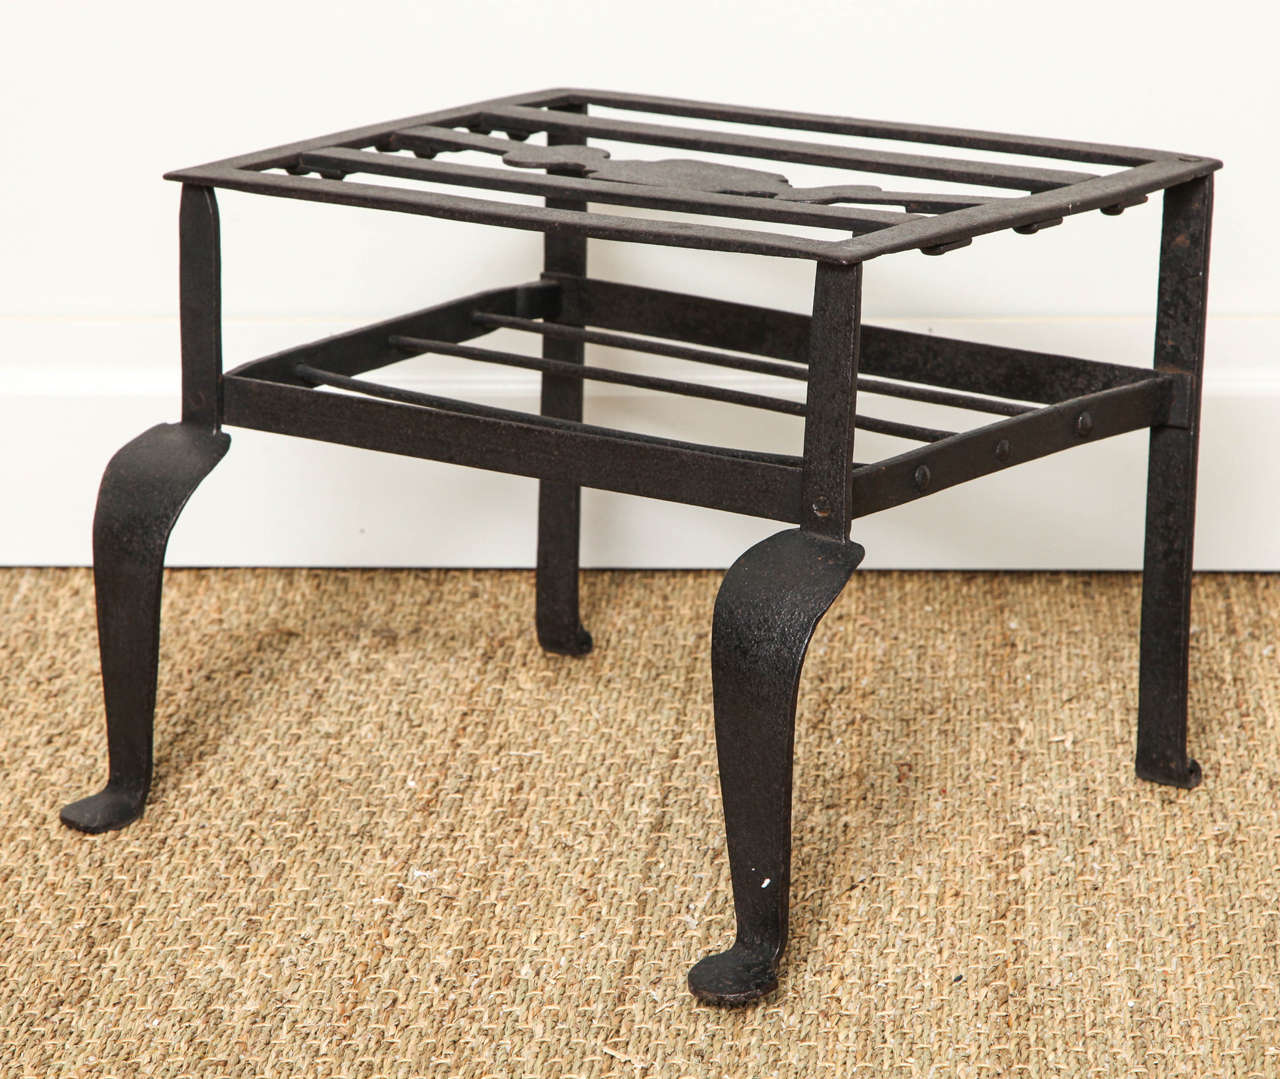 Good late 18th century wrought iron footman or trivet, the slatted top with shaped centre spat, the front cabriole legs with penny feet, the whole with good patinated surface.